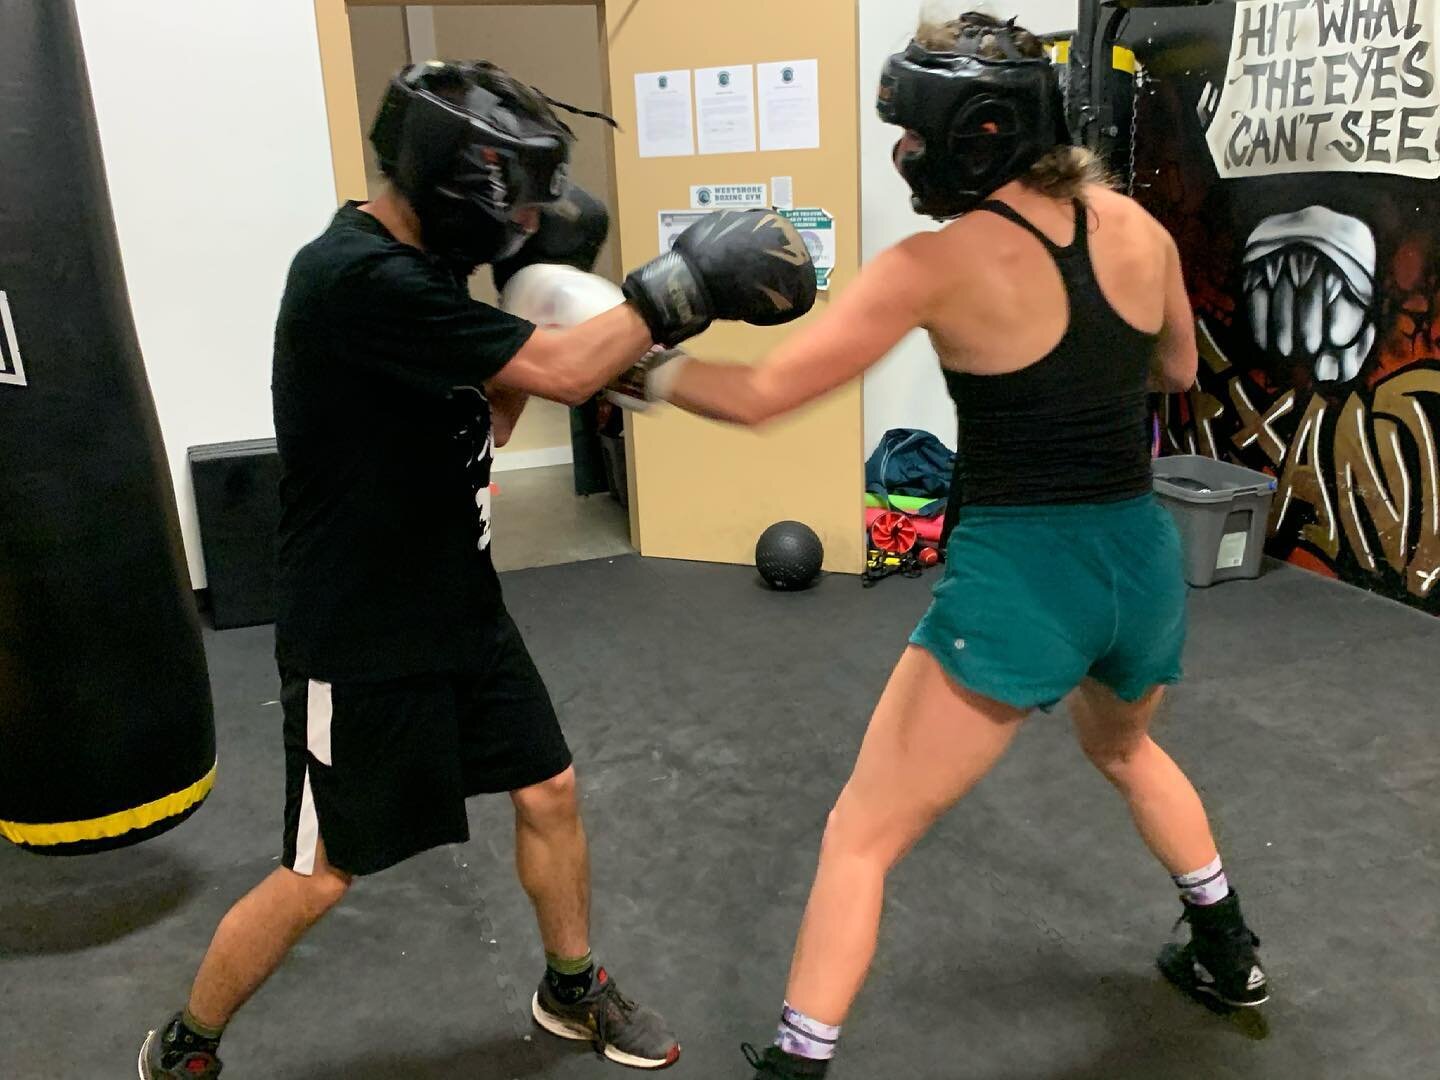 It&rsquo;s great to be sparring again. 😎

#boxing #sparring #fight #training #boxingtraining #boxinglife #boxingdrills #backatit